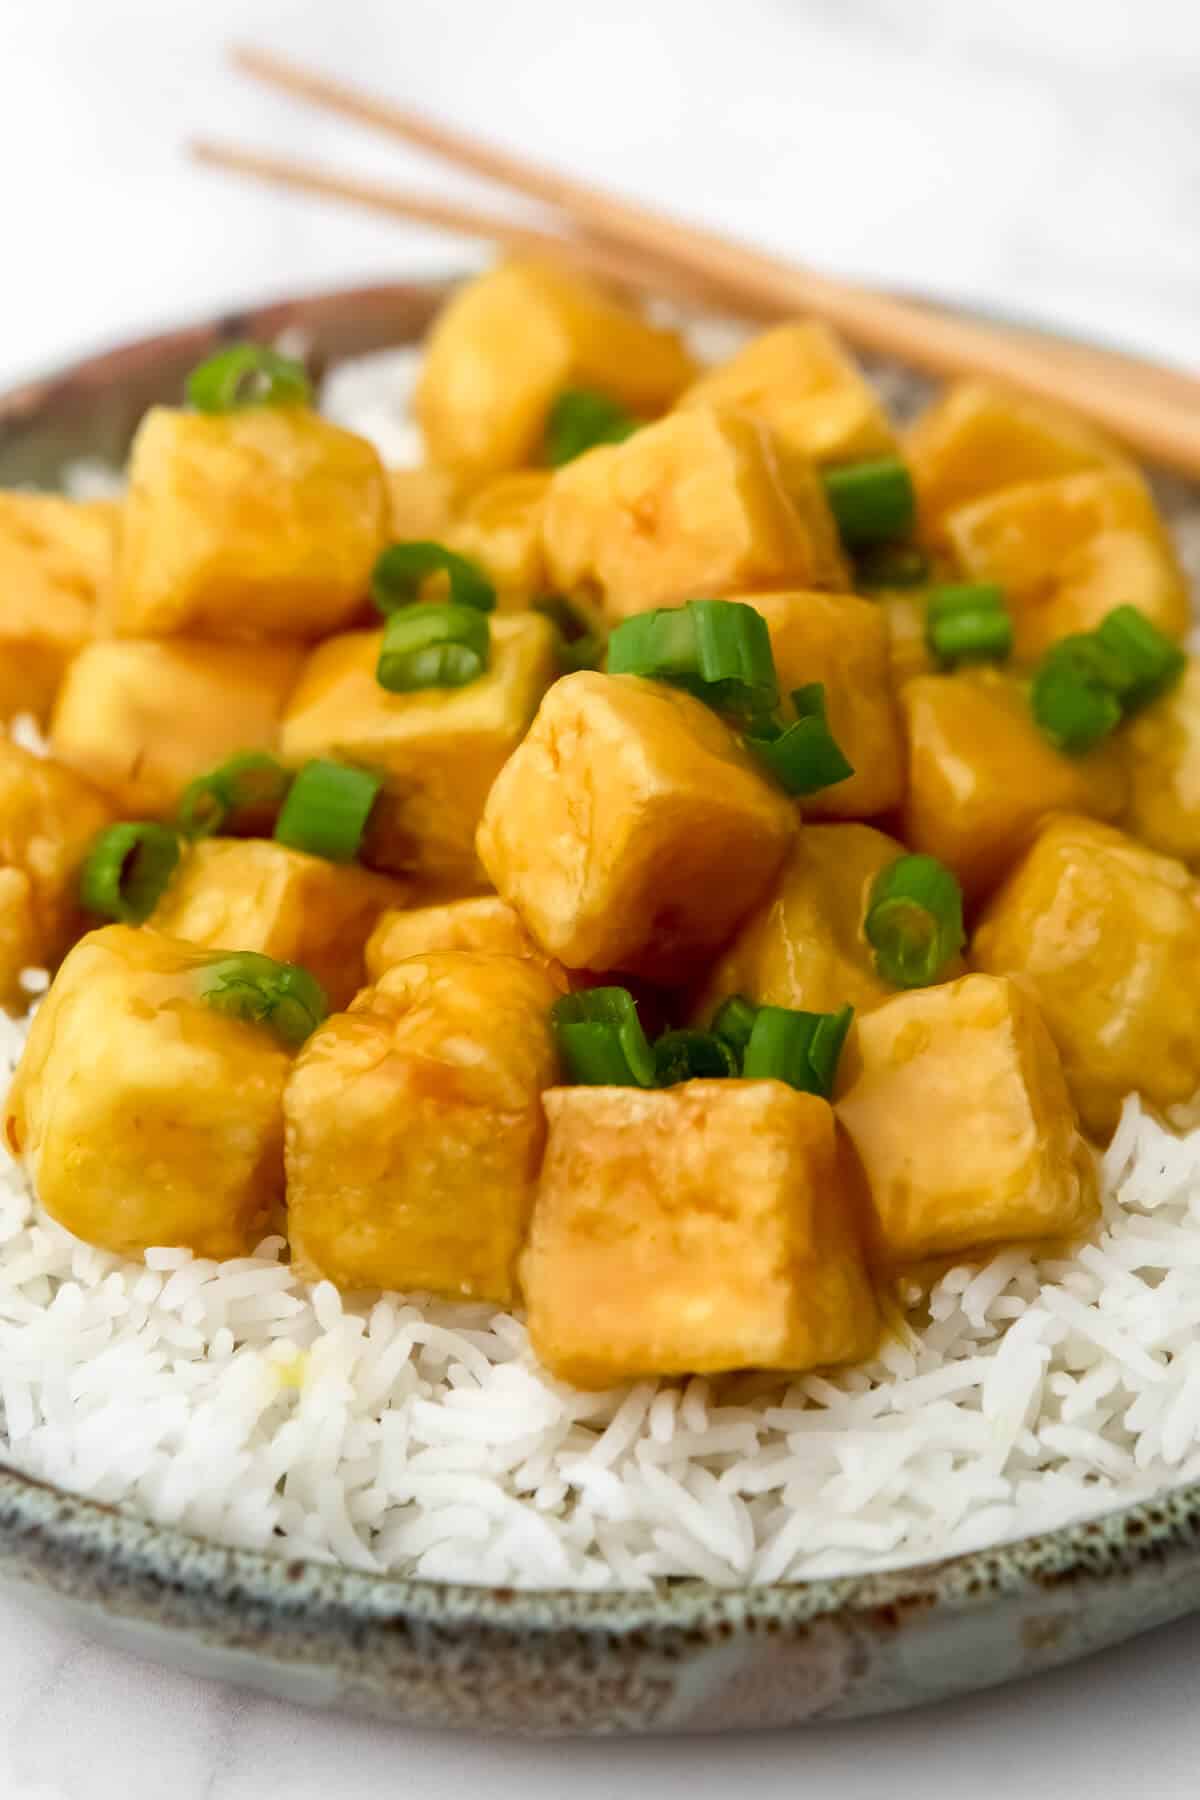 Vegan orange tofu on a bed of white rice sprinkled with green onions.